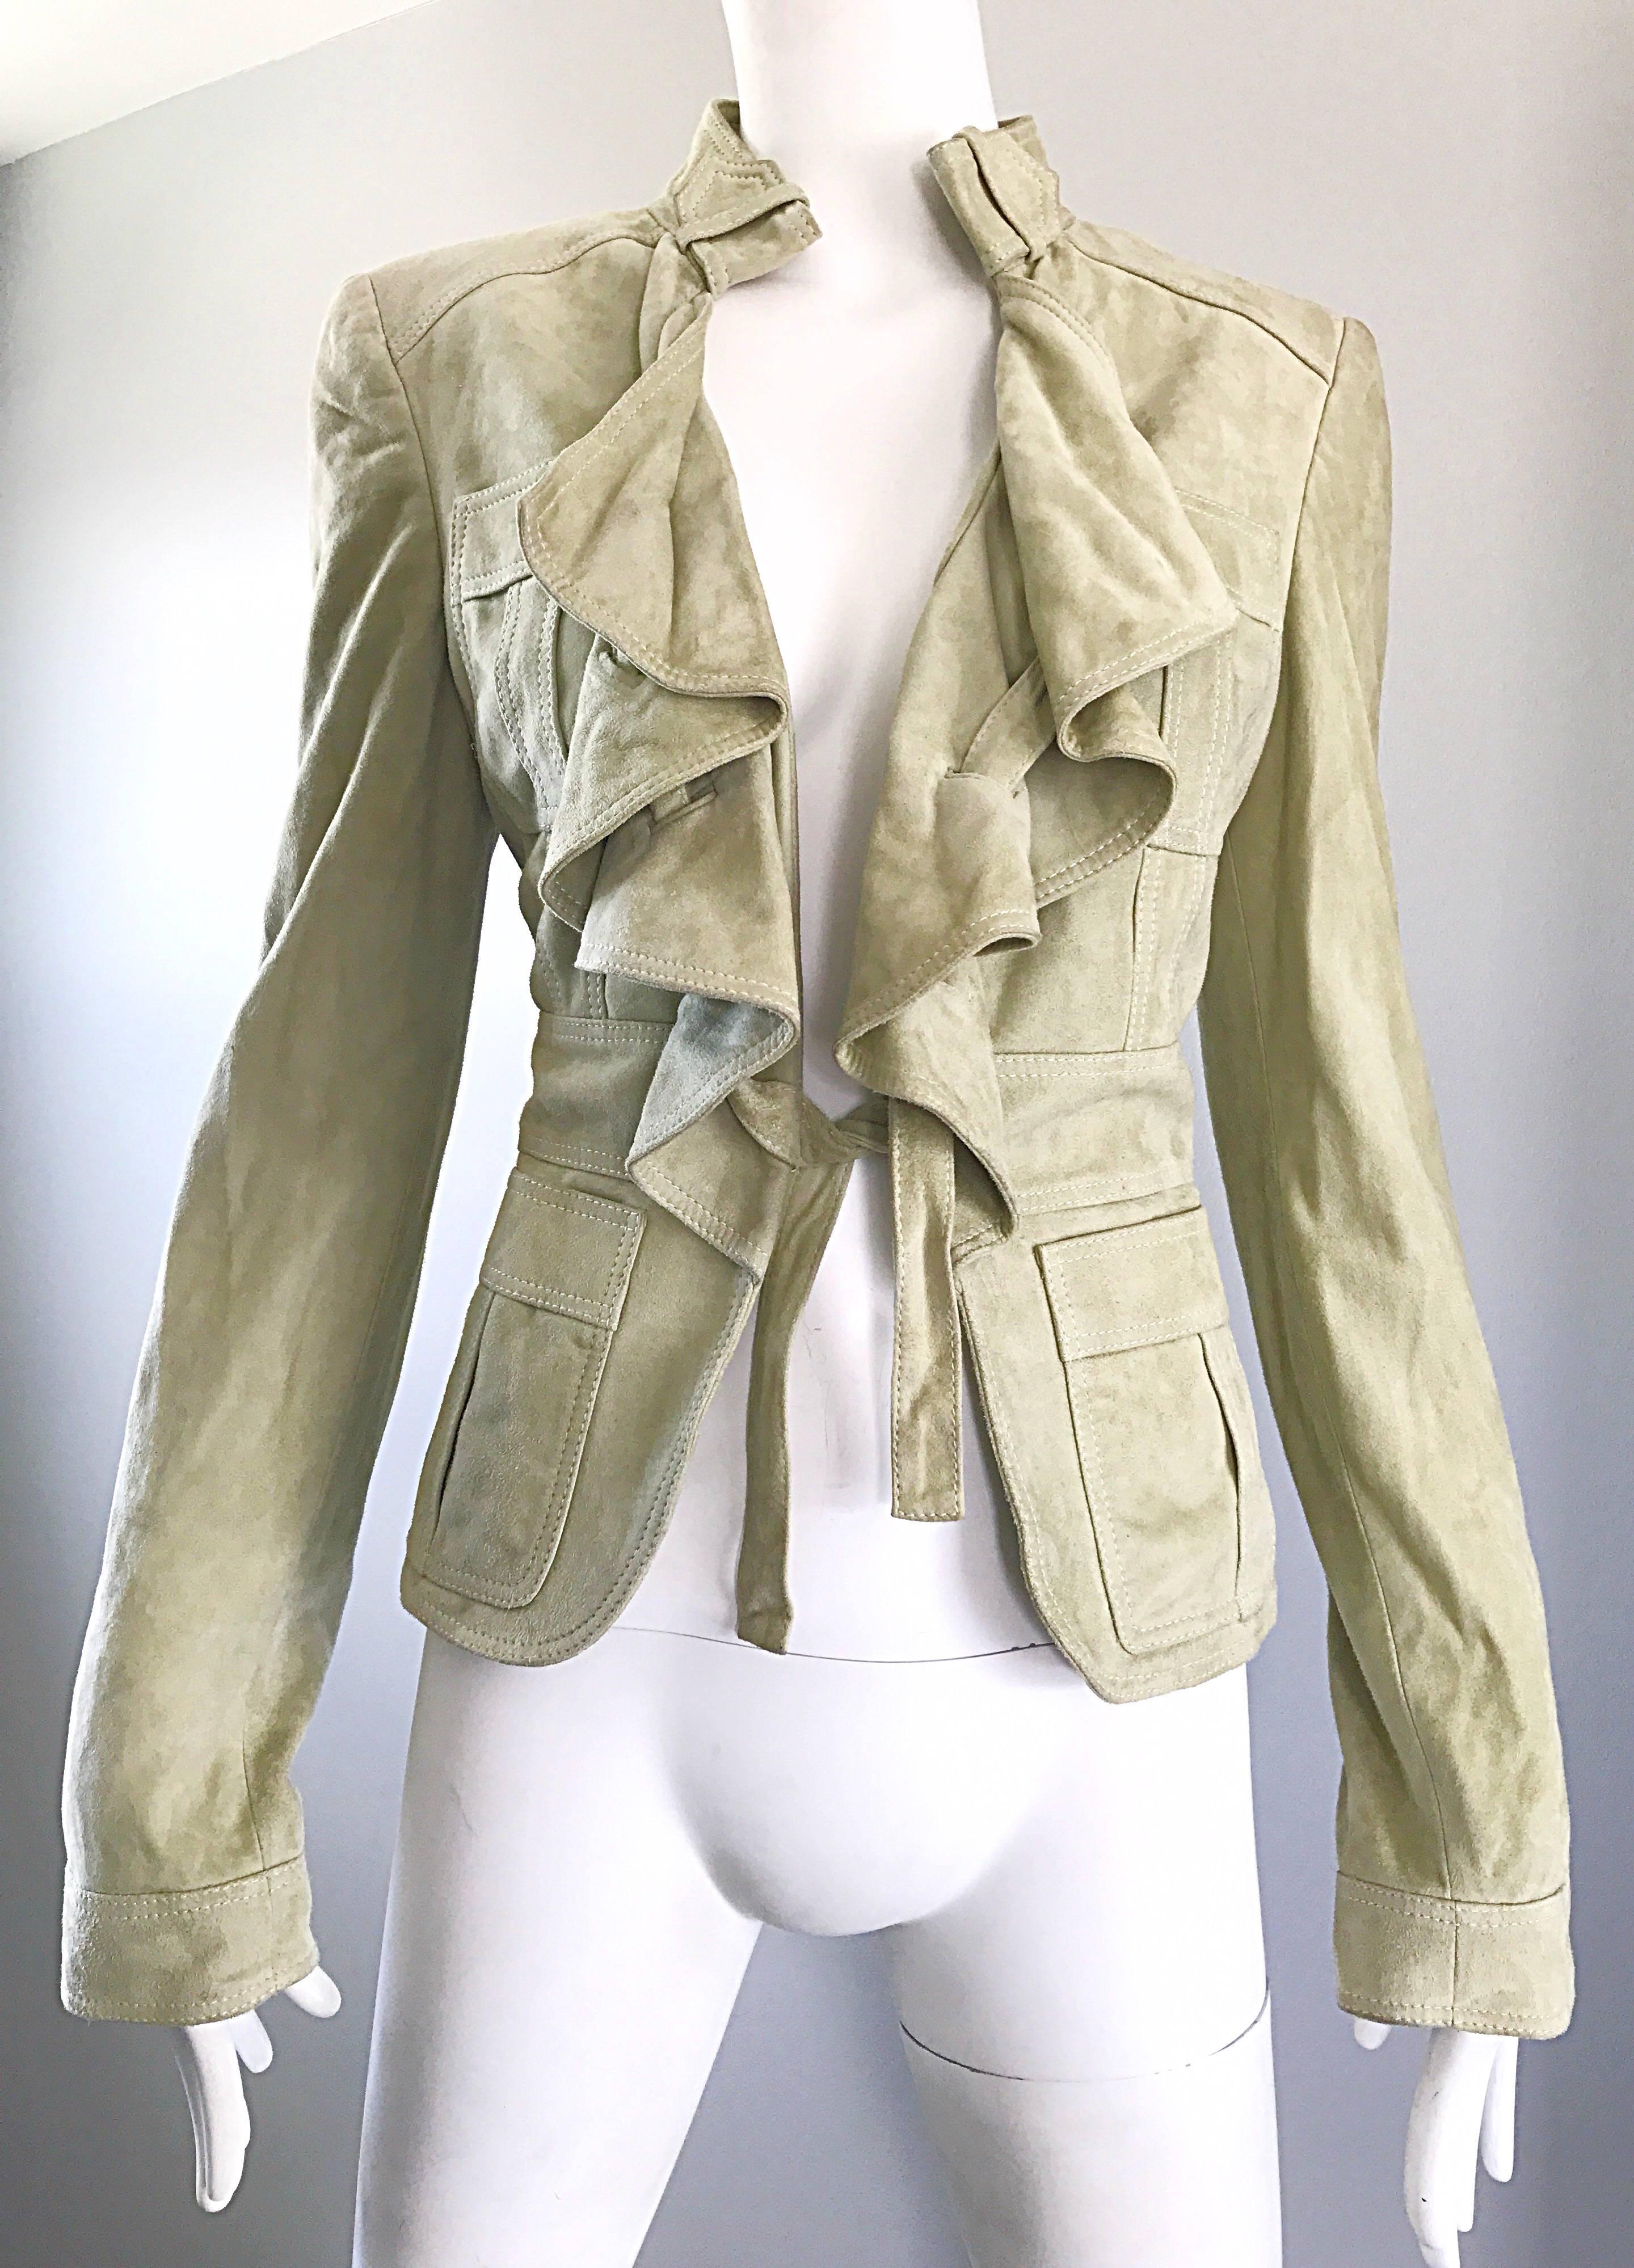 Women's Tom Ford for Gucci Pistachio Khaki Suede Leather 1990s Vintage Ruffle Jacket 